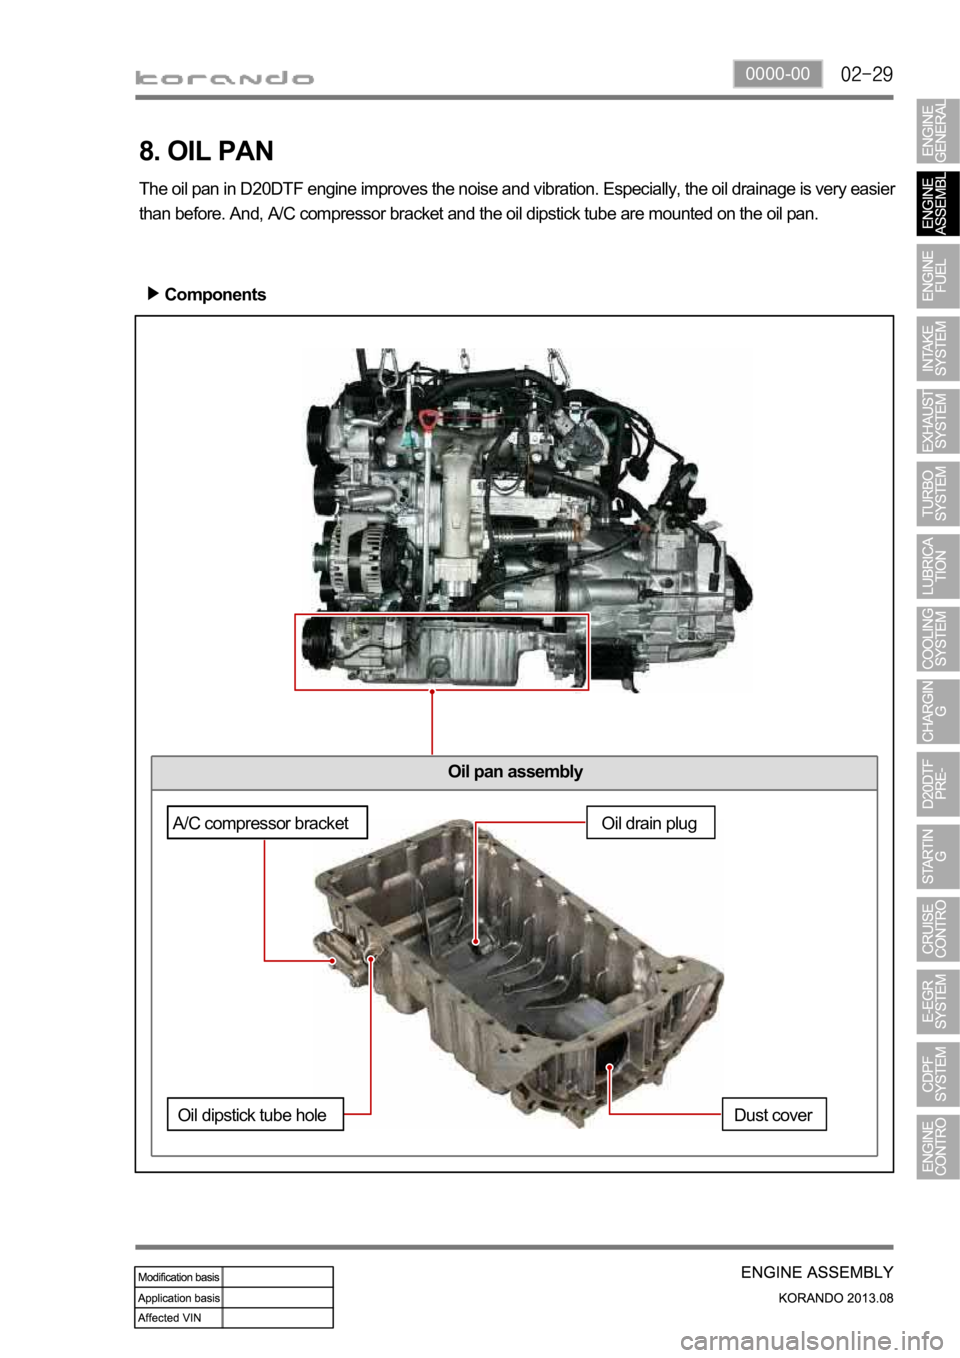 SSANGYONG KORANDO 2013  Service Manual 0000-00
Oil pan assembly
8. OIL PAN
The oil pan in D20DTF engine improves the noise and vibration. Especially, the oil drainage is very easier 
than before. And, A/C compressor bracket and the oil dip